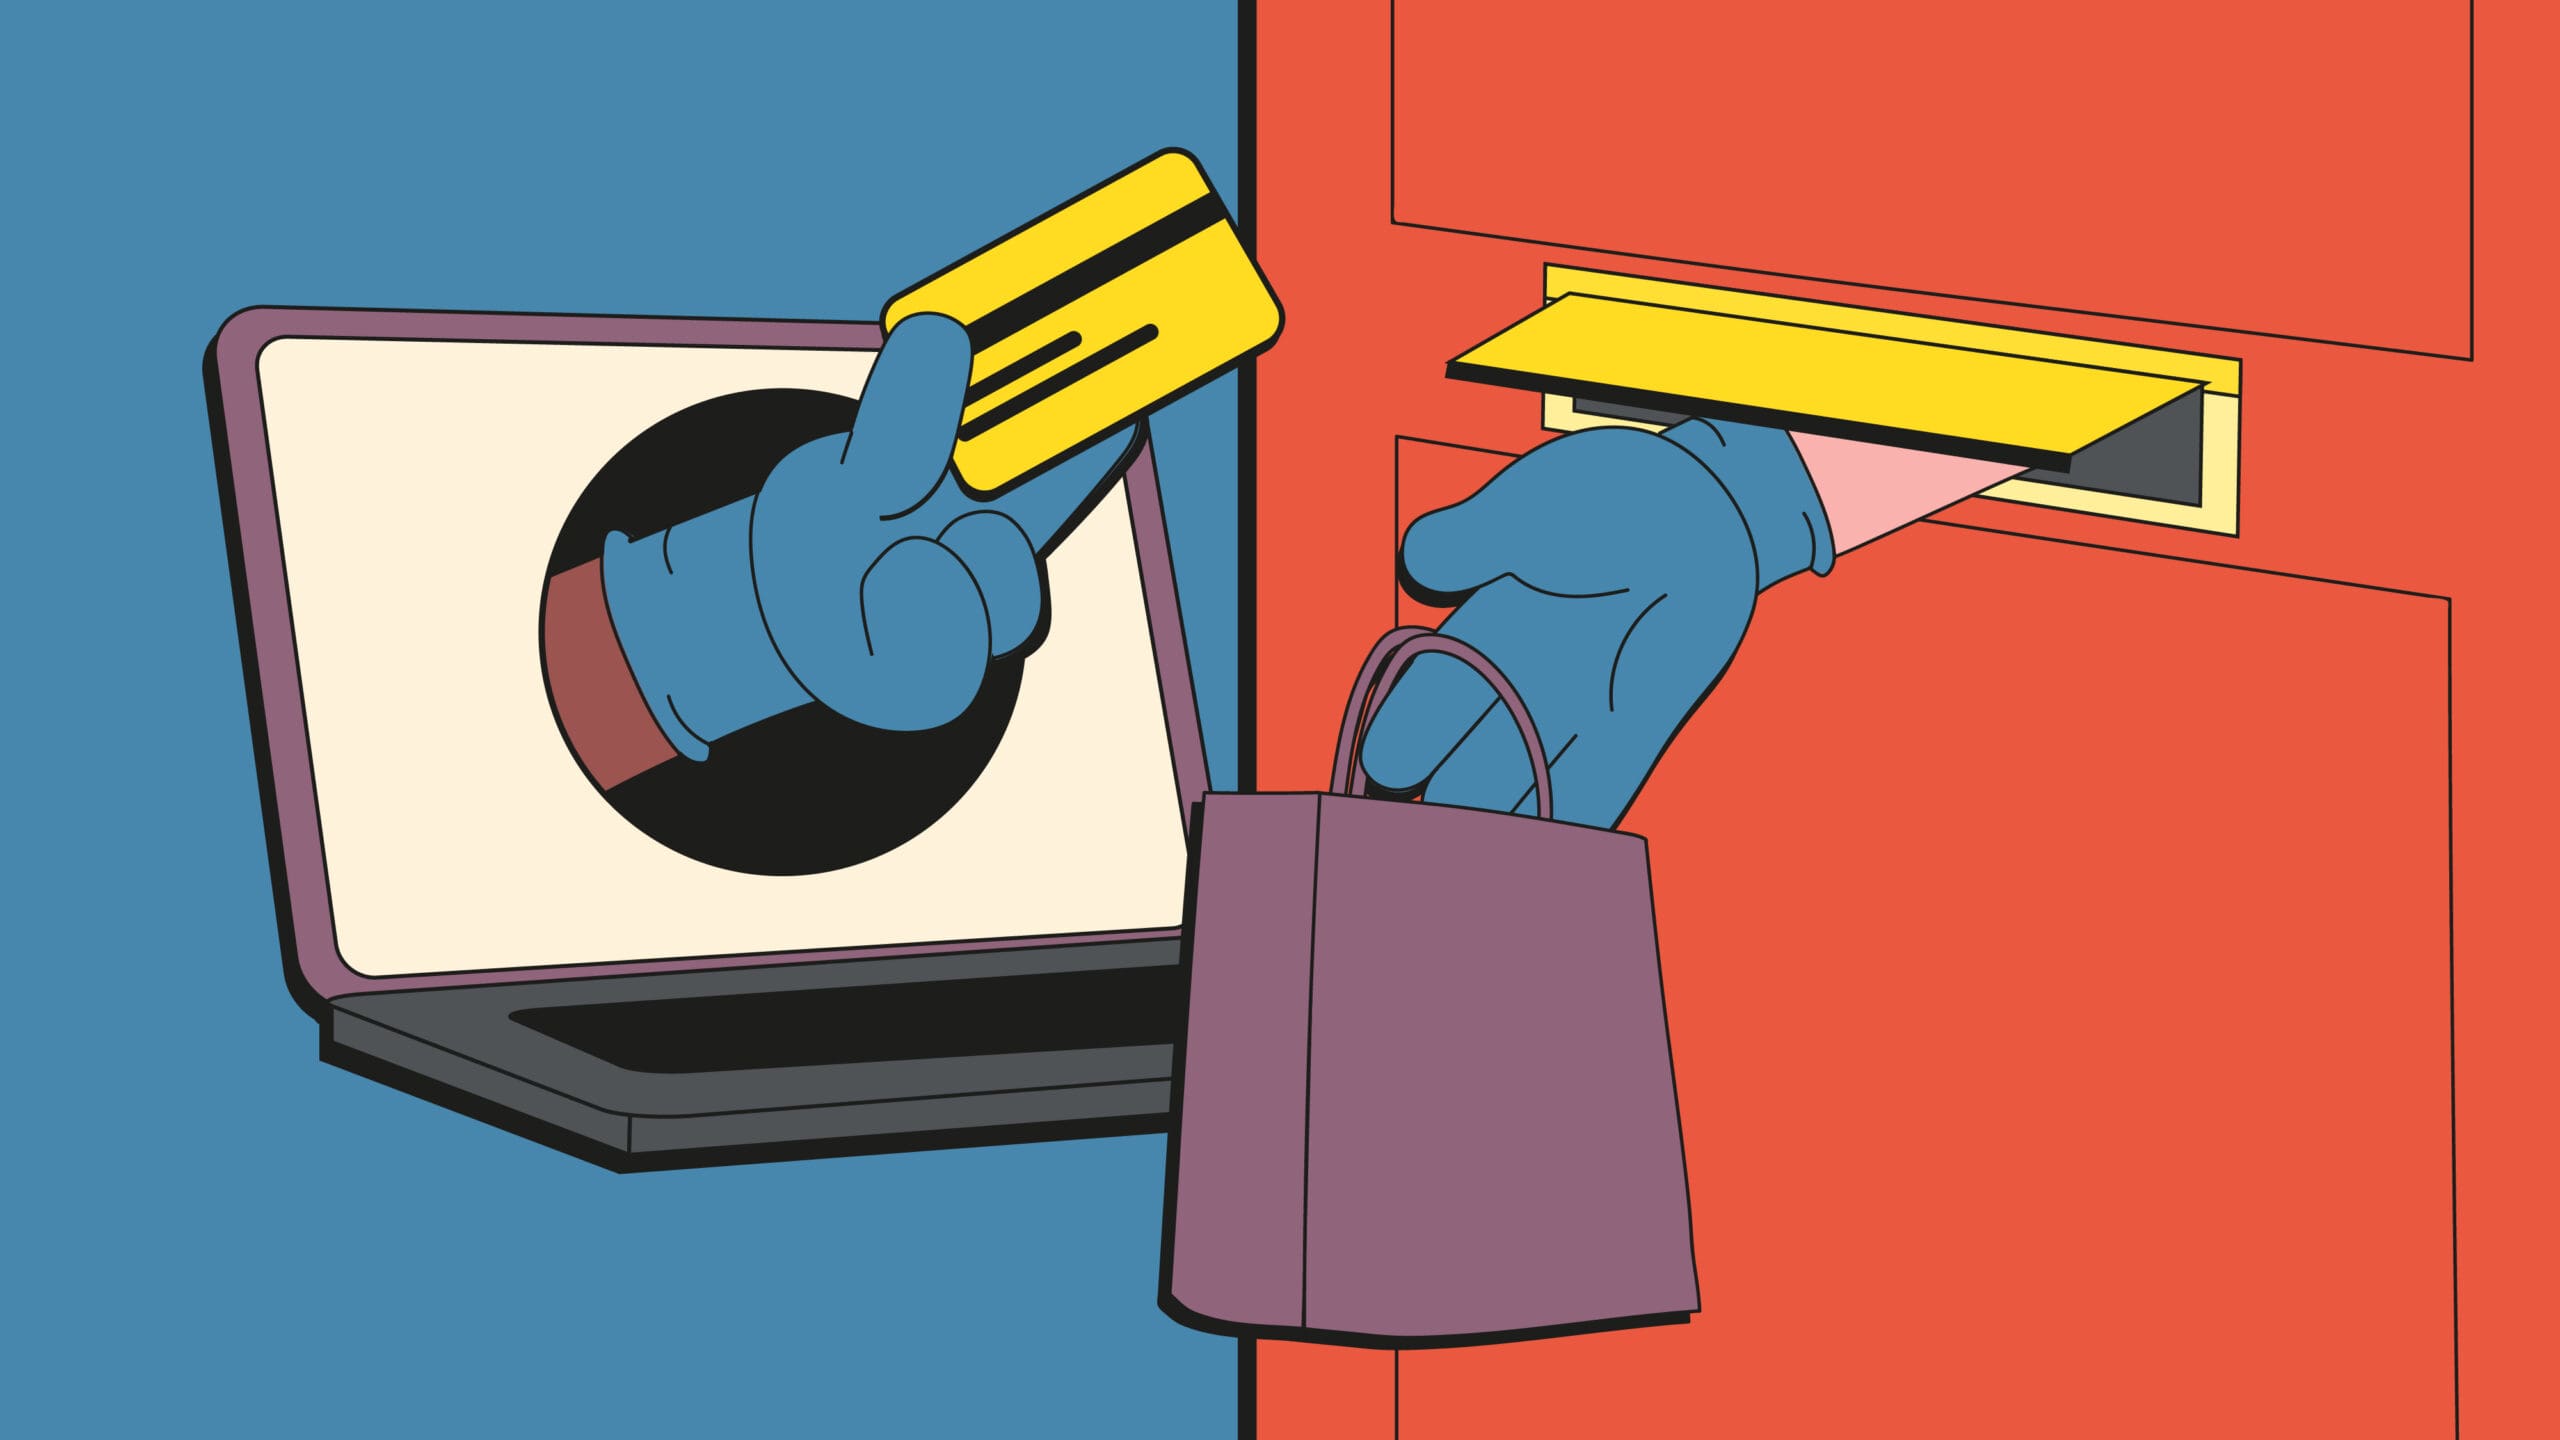 Illustration of hands in gloves exchanging items at a door.